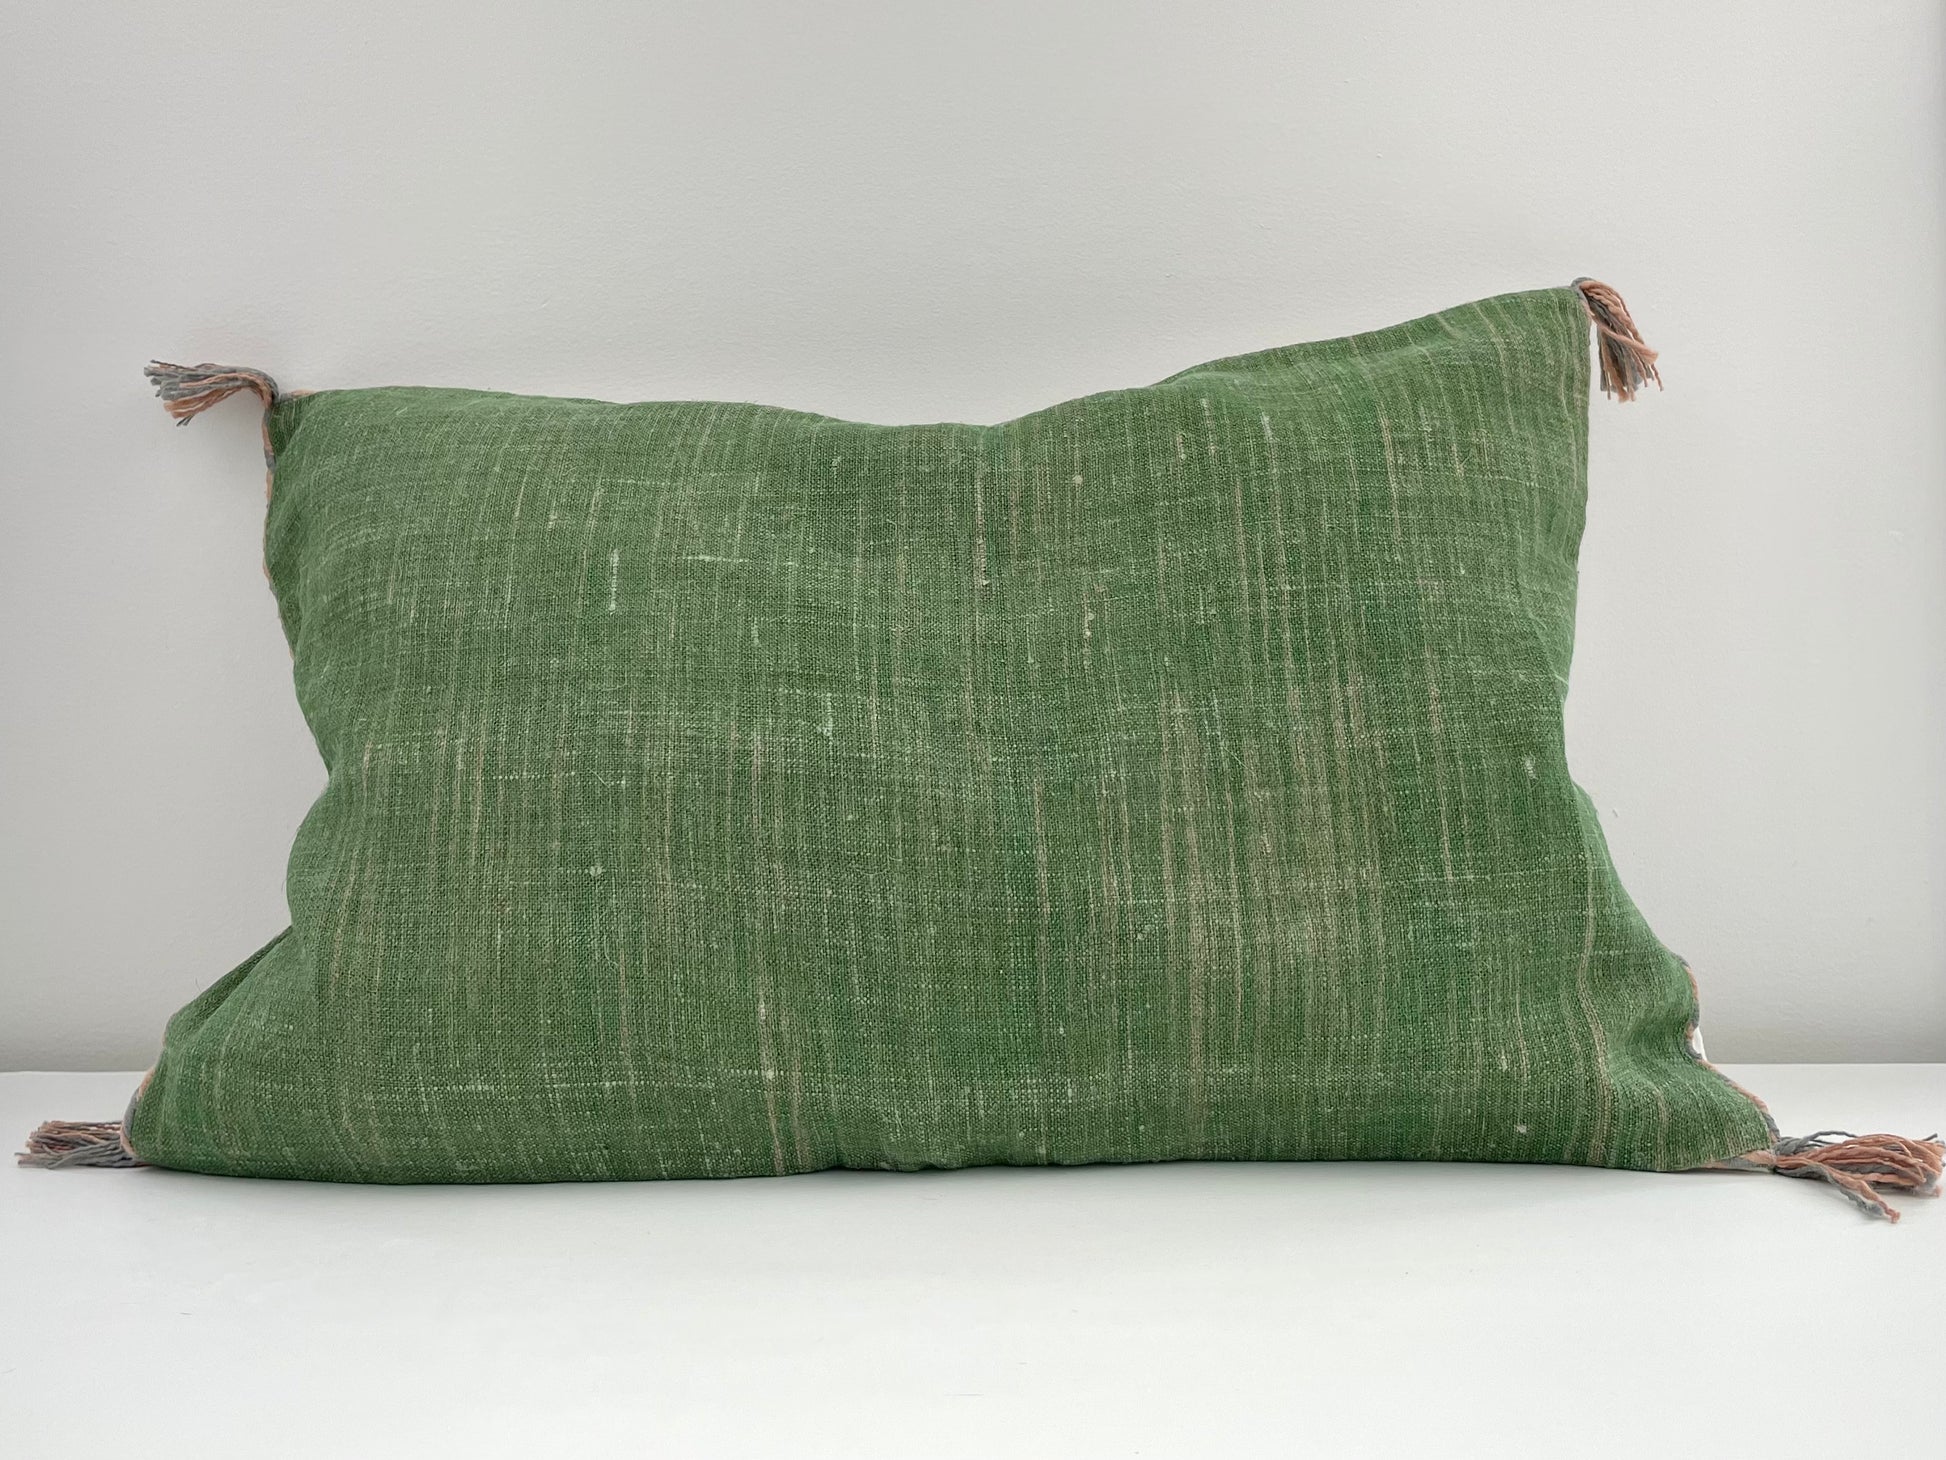 green linen 24x16 lumbar pillow cover with striped edging and tassels